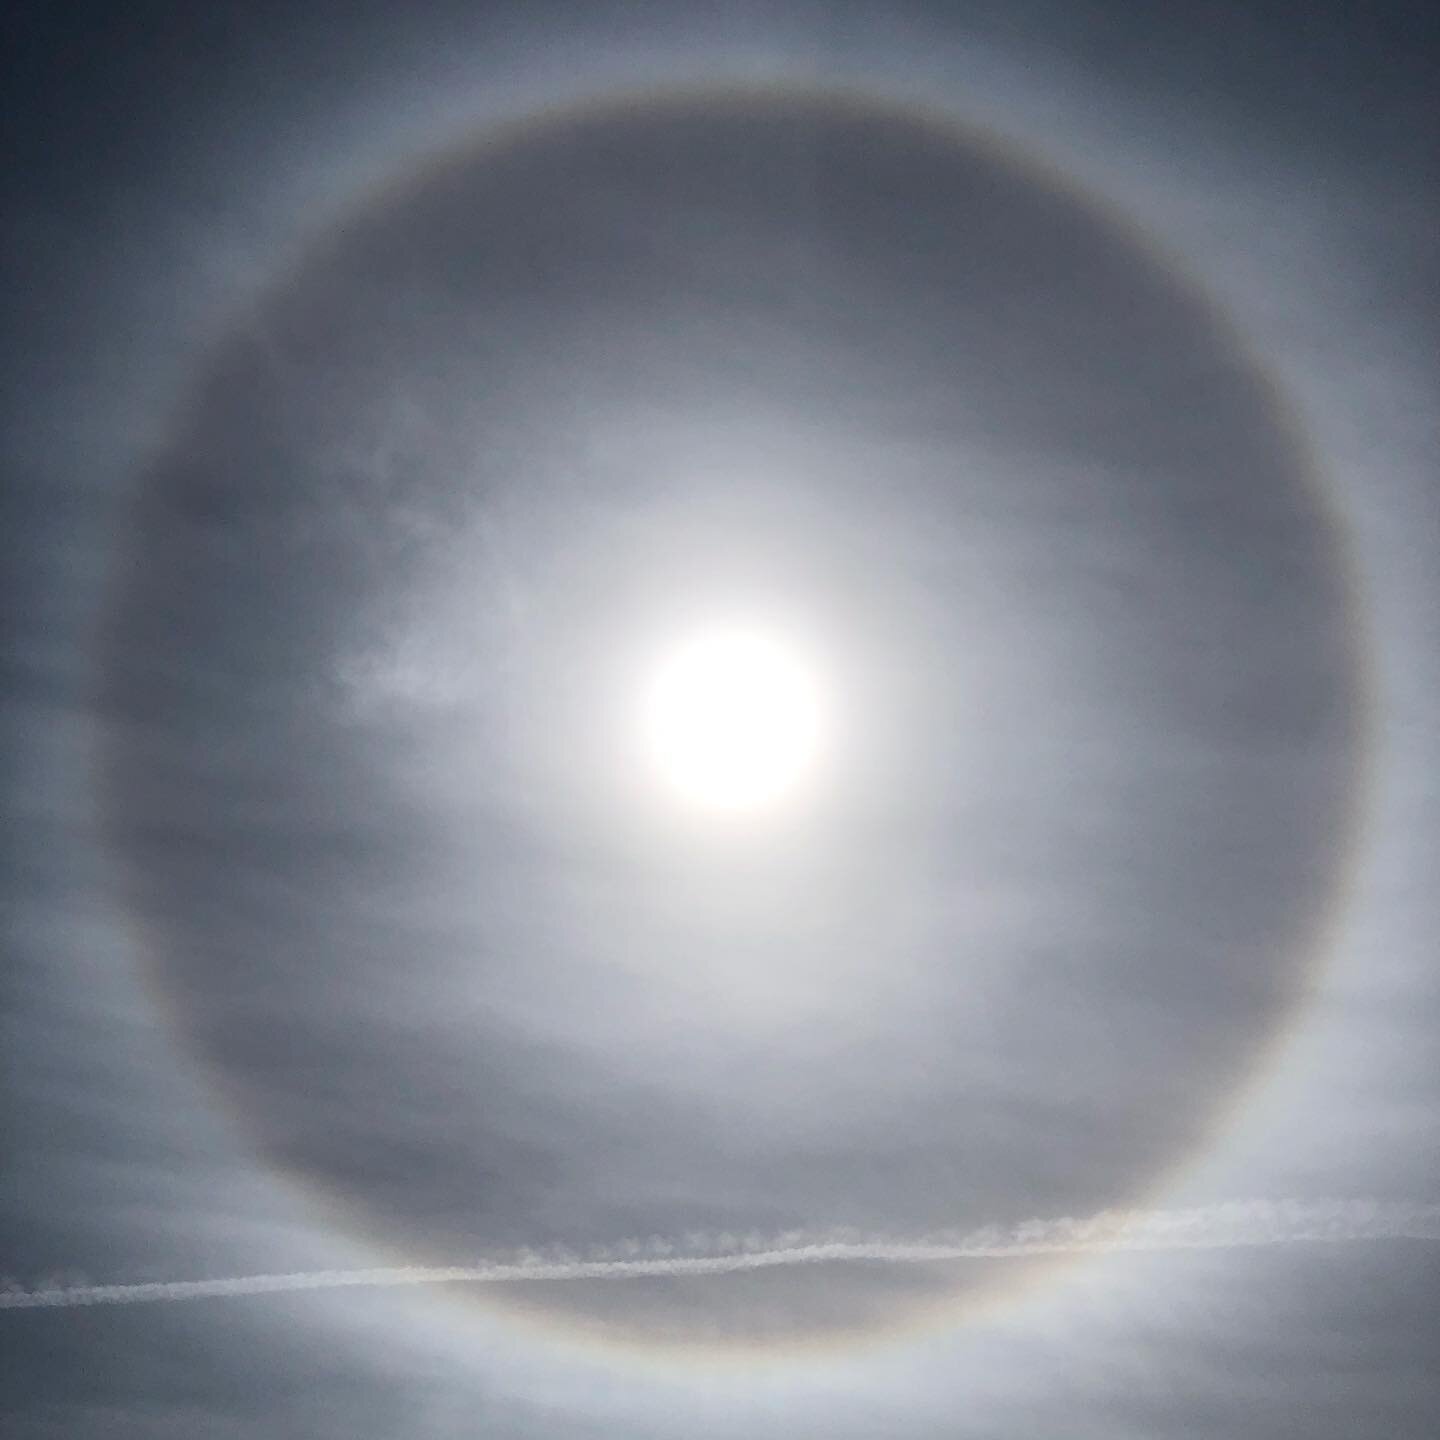 Love it when this happens. This solar halo seen near the studio is a fairly common example compared to other halo types, but that doesn&rsquo;t mean it&rsquo;s not amazing. 

#cloud #clouds #halo #solarhalo #sunhalo #cloudappreciationsociety @cloudap